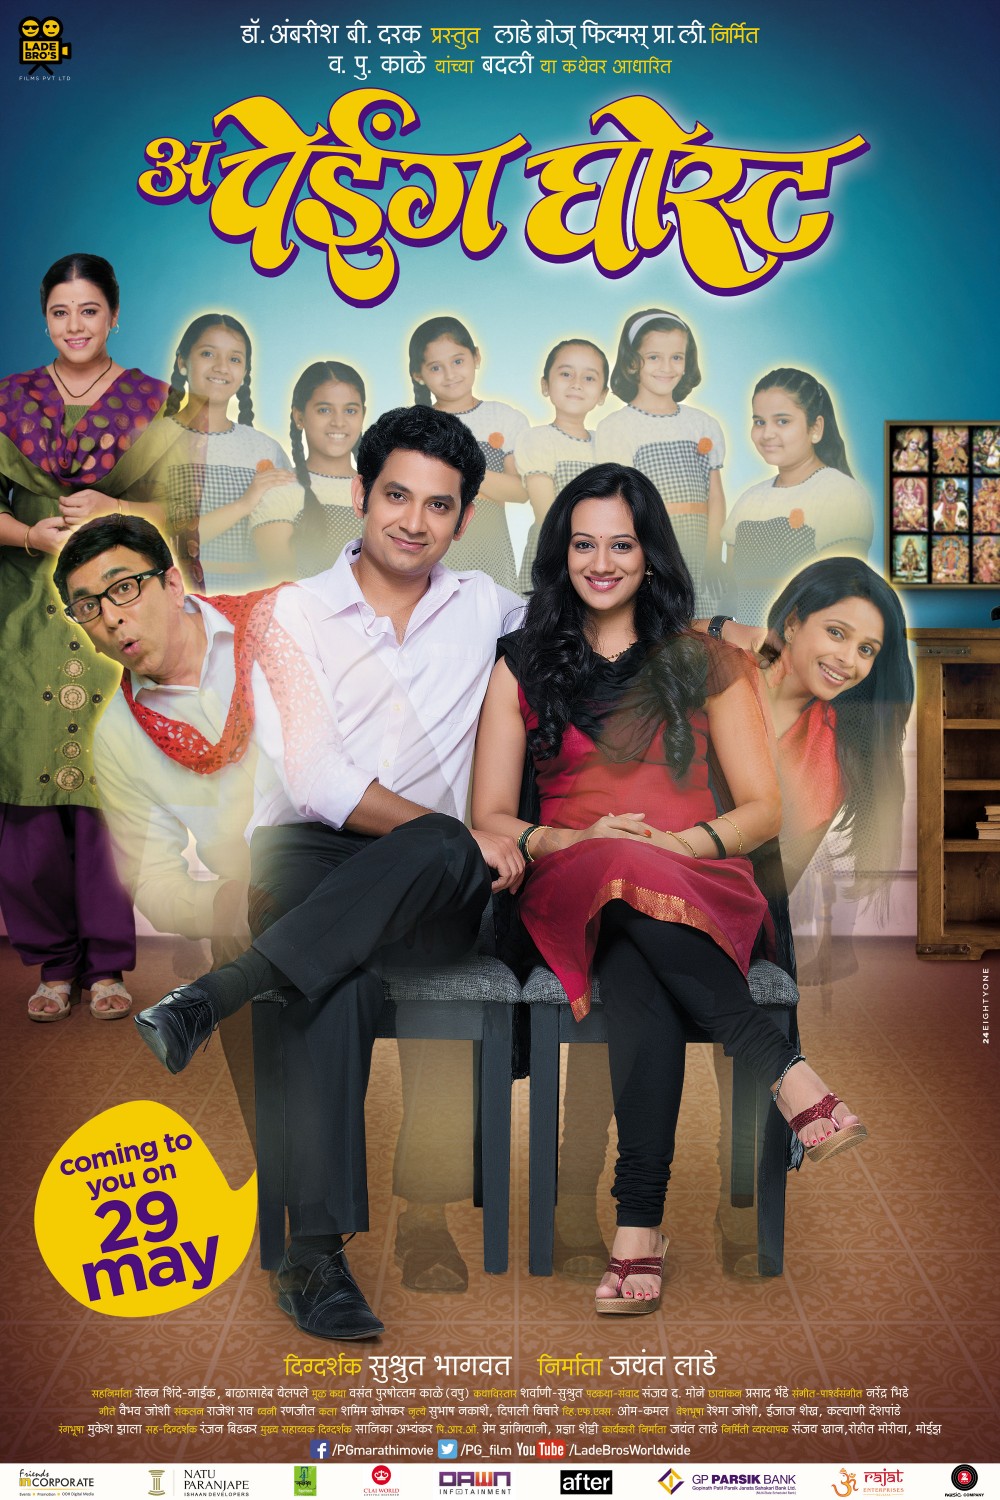 Extra Large Movie Poster Image for Aga Bai Arechyaa 2 (#8 of 8)